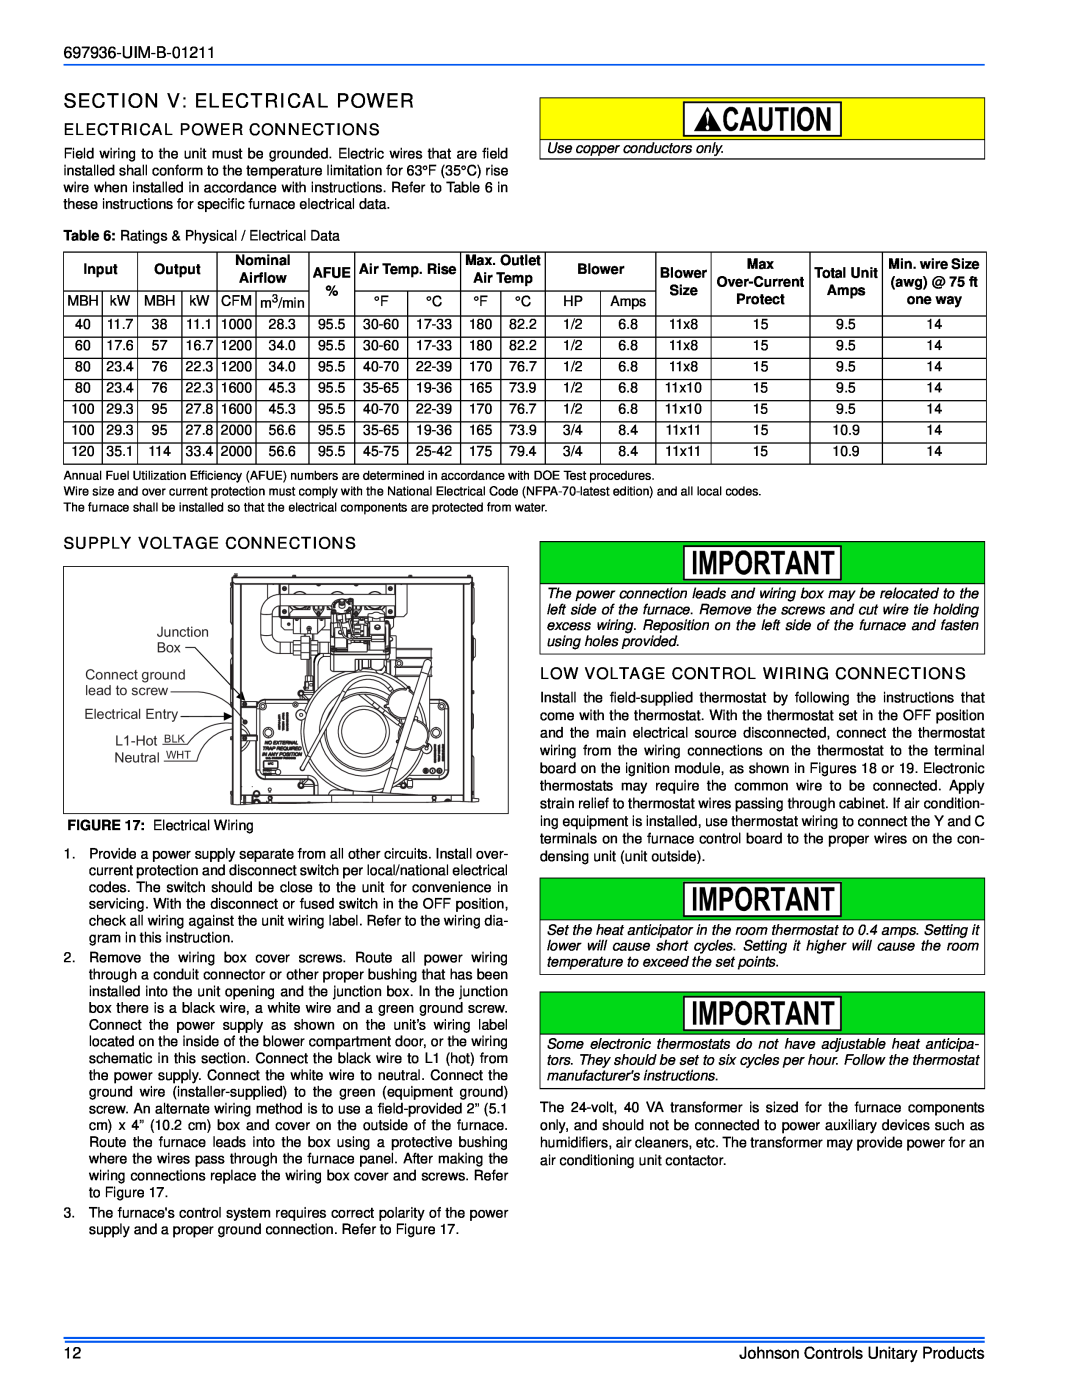 Johnson Controls TM9X*MP Section V Electrical Power, UIM-B-01211, Electrical Power Connections, Supply Voltage Connections 